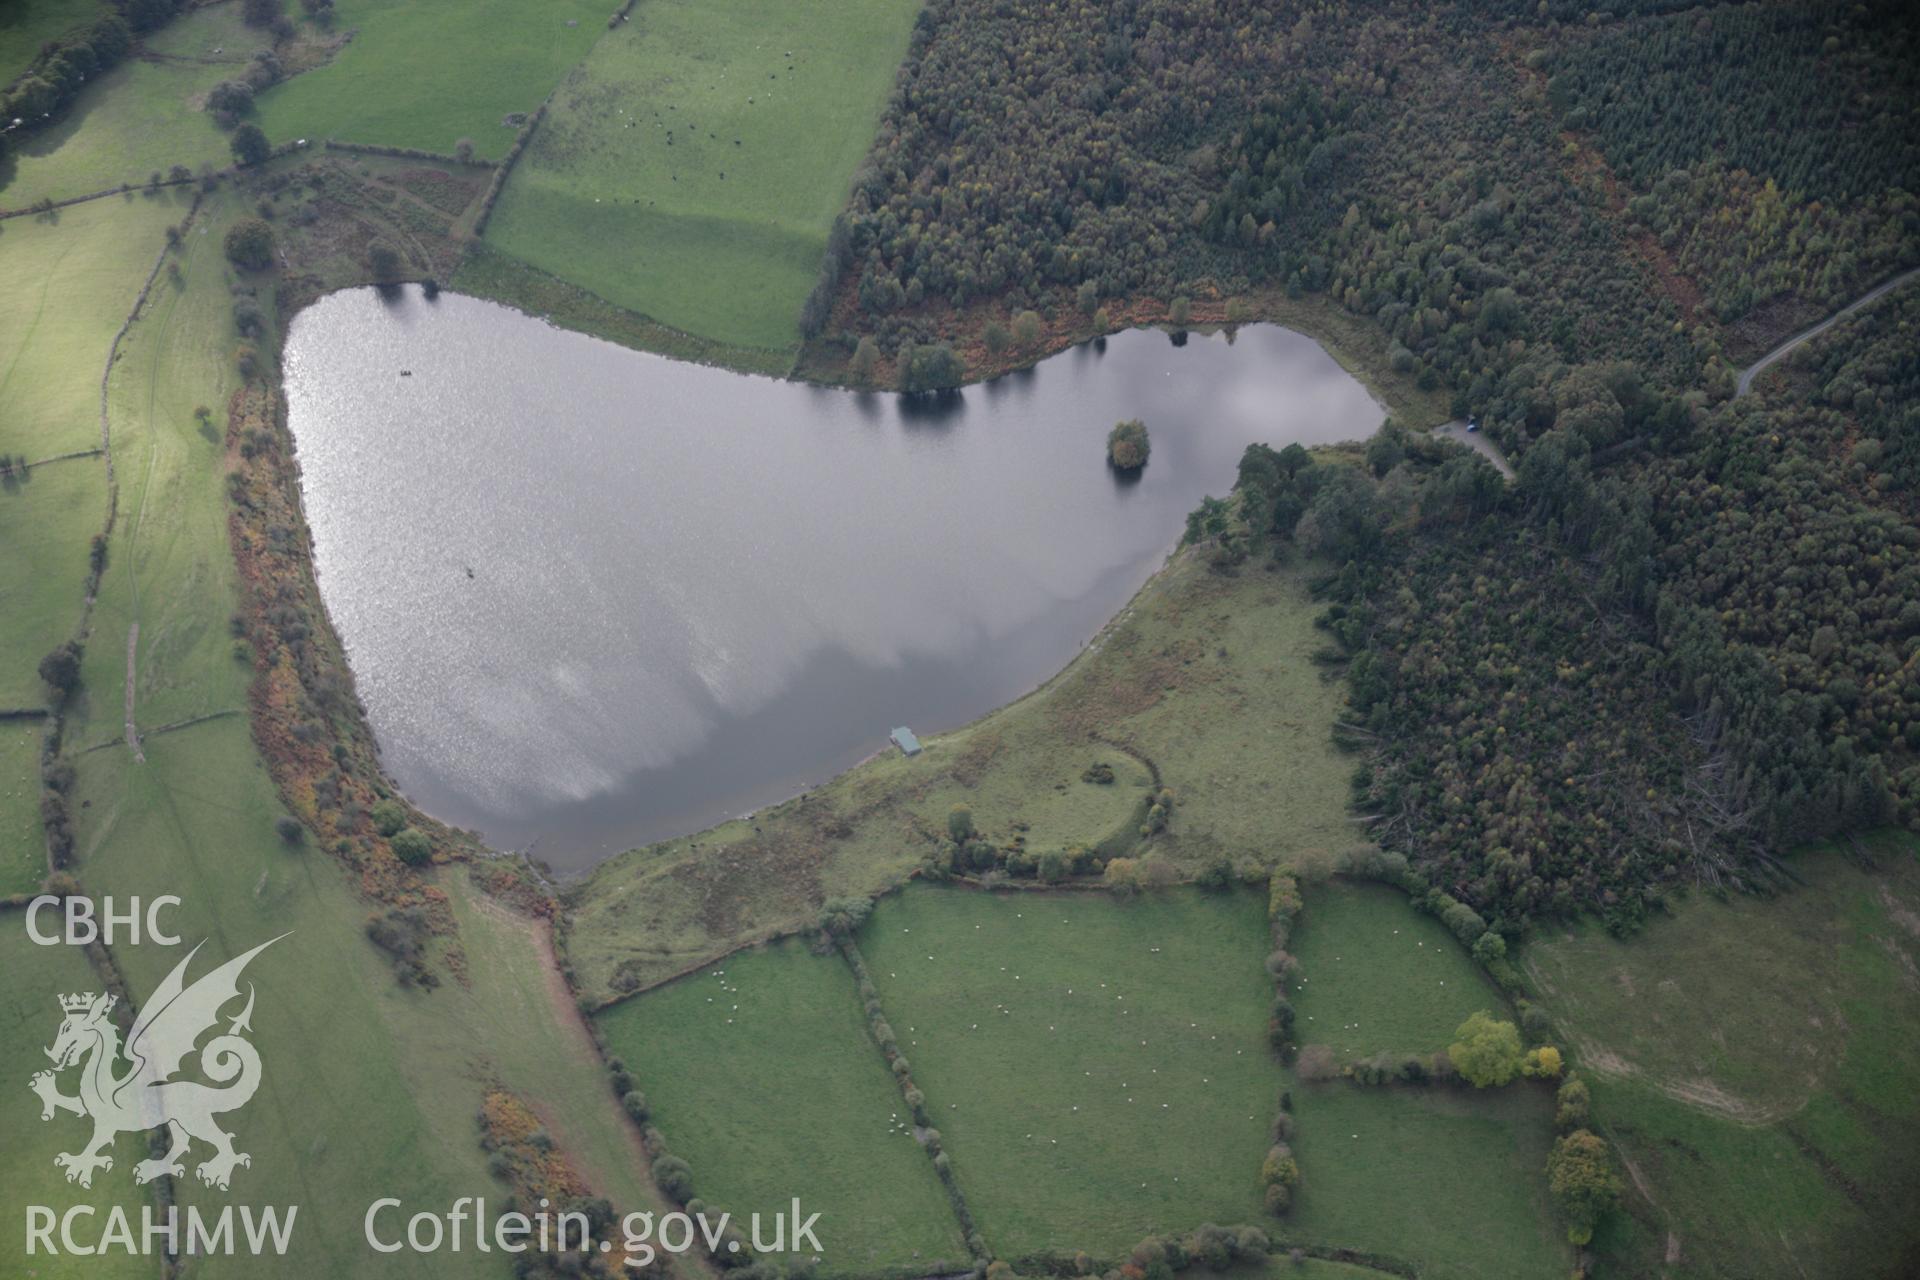 RCAHMW colour oblique aerial photograph of Llyn Gwyn Enclosure, viewed from the north-east. Taken on 13 October 2005 by Toby Driver